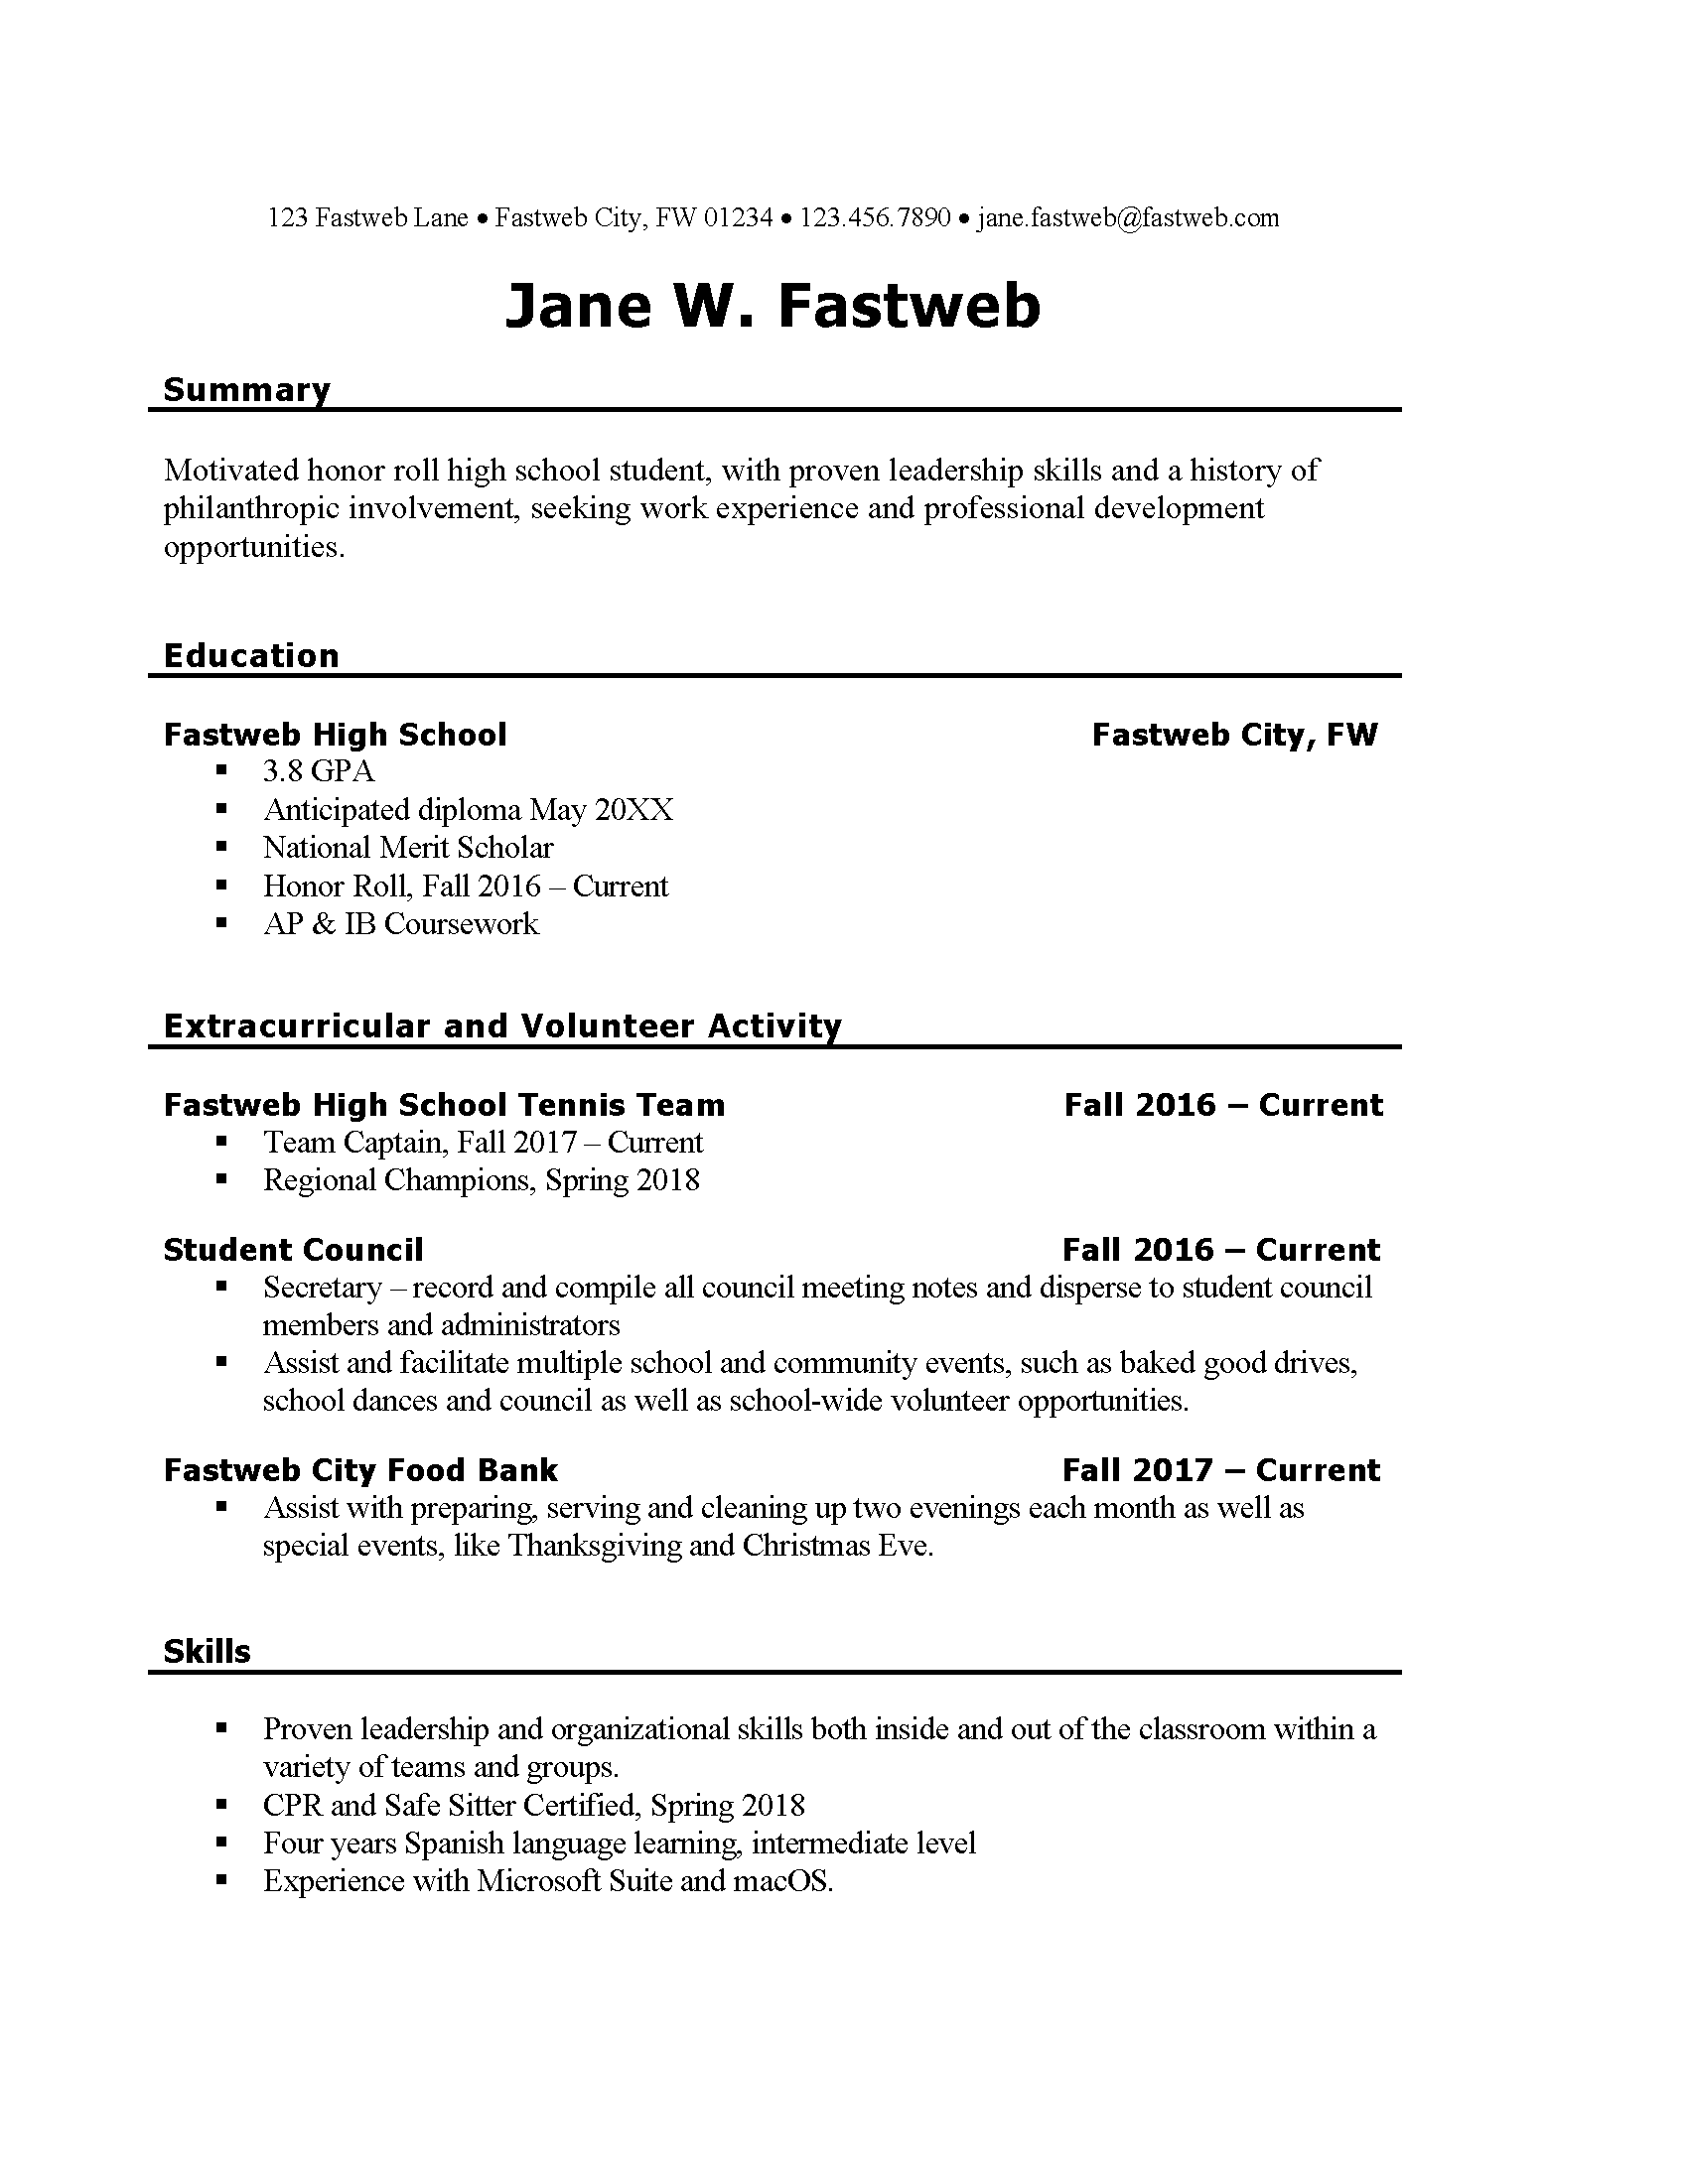 experience resume for graphic designer   45